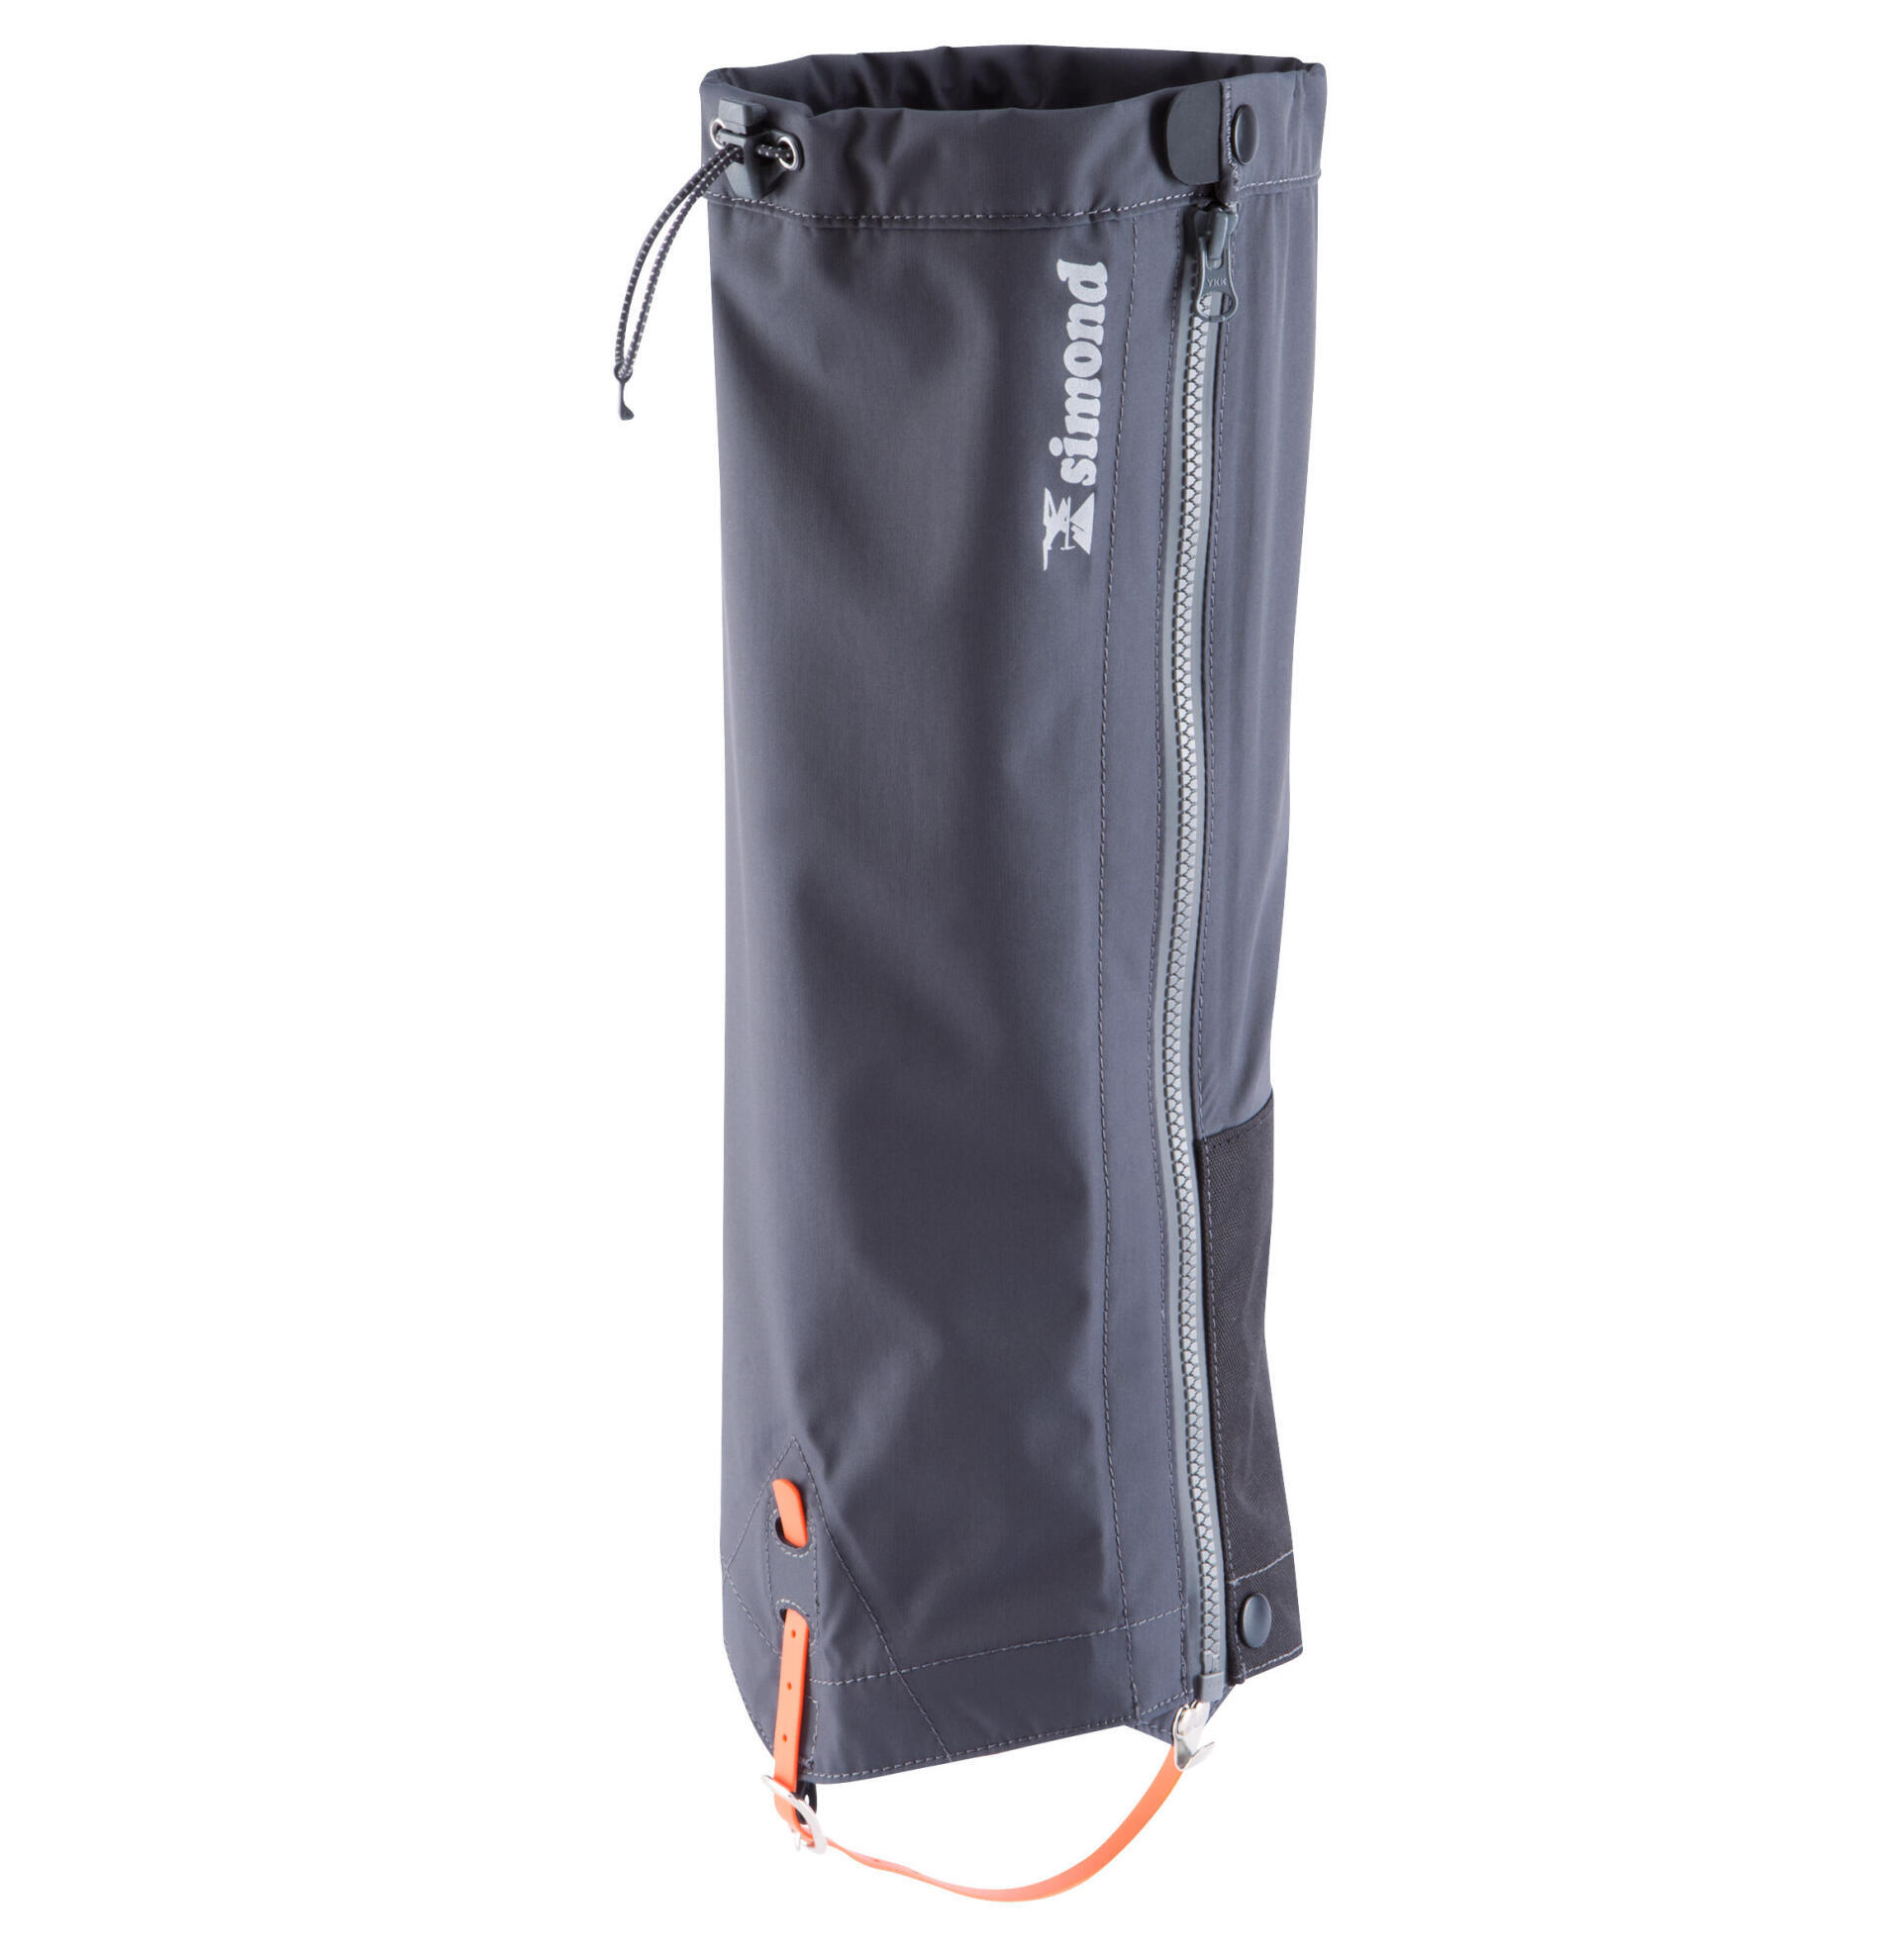 Gaiters for mountaineering